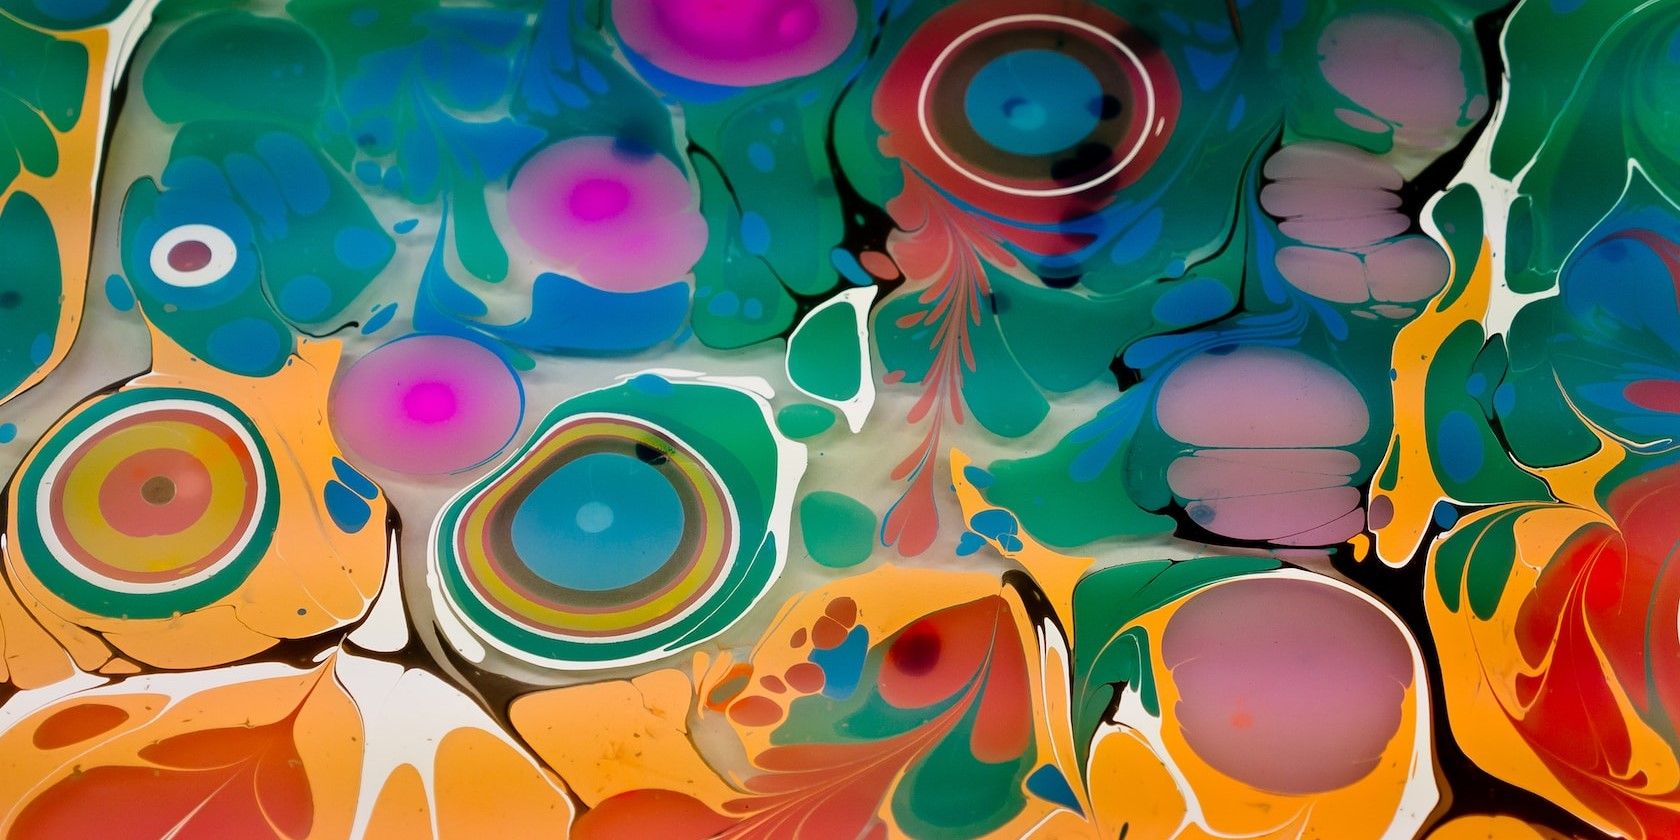 A Vibrant Abstract Painting in Ebru Fluid Art Style